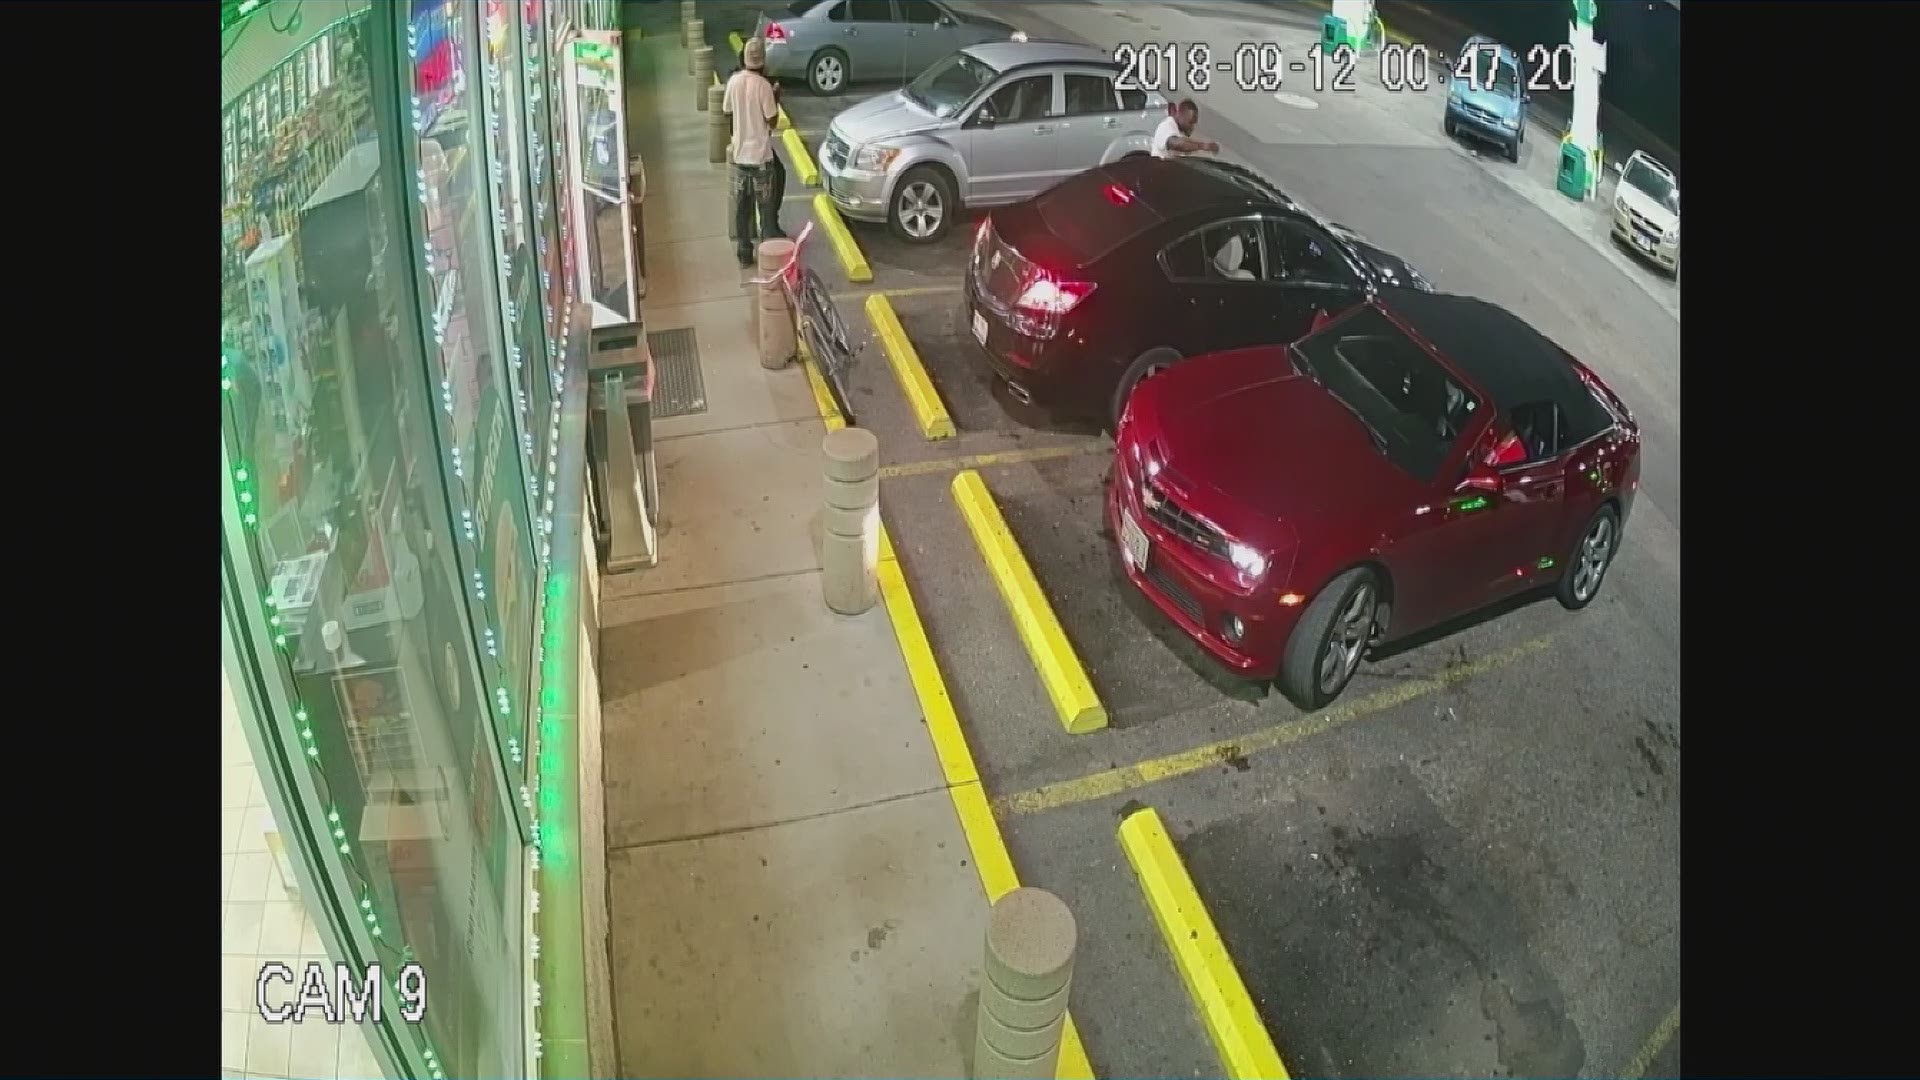 Customers ducked, ran for cover and crawled on the ground to get away from a shootout at a gas station in East St. Louis. New video released by the police department shows the terrifying moments from inside and outside the business.